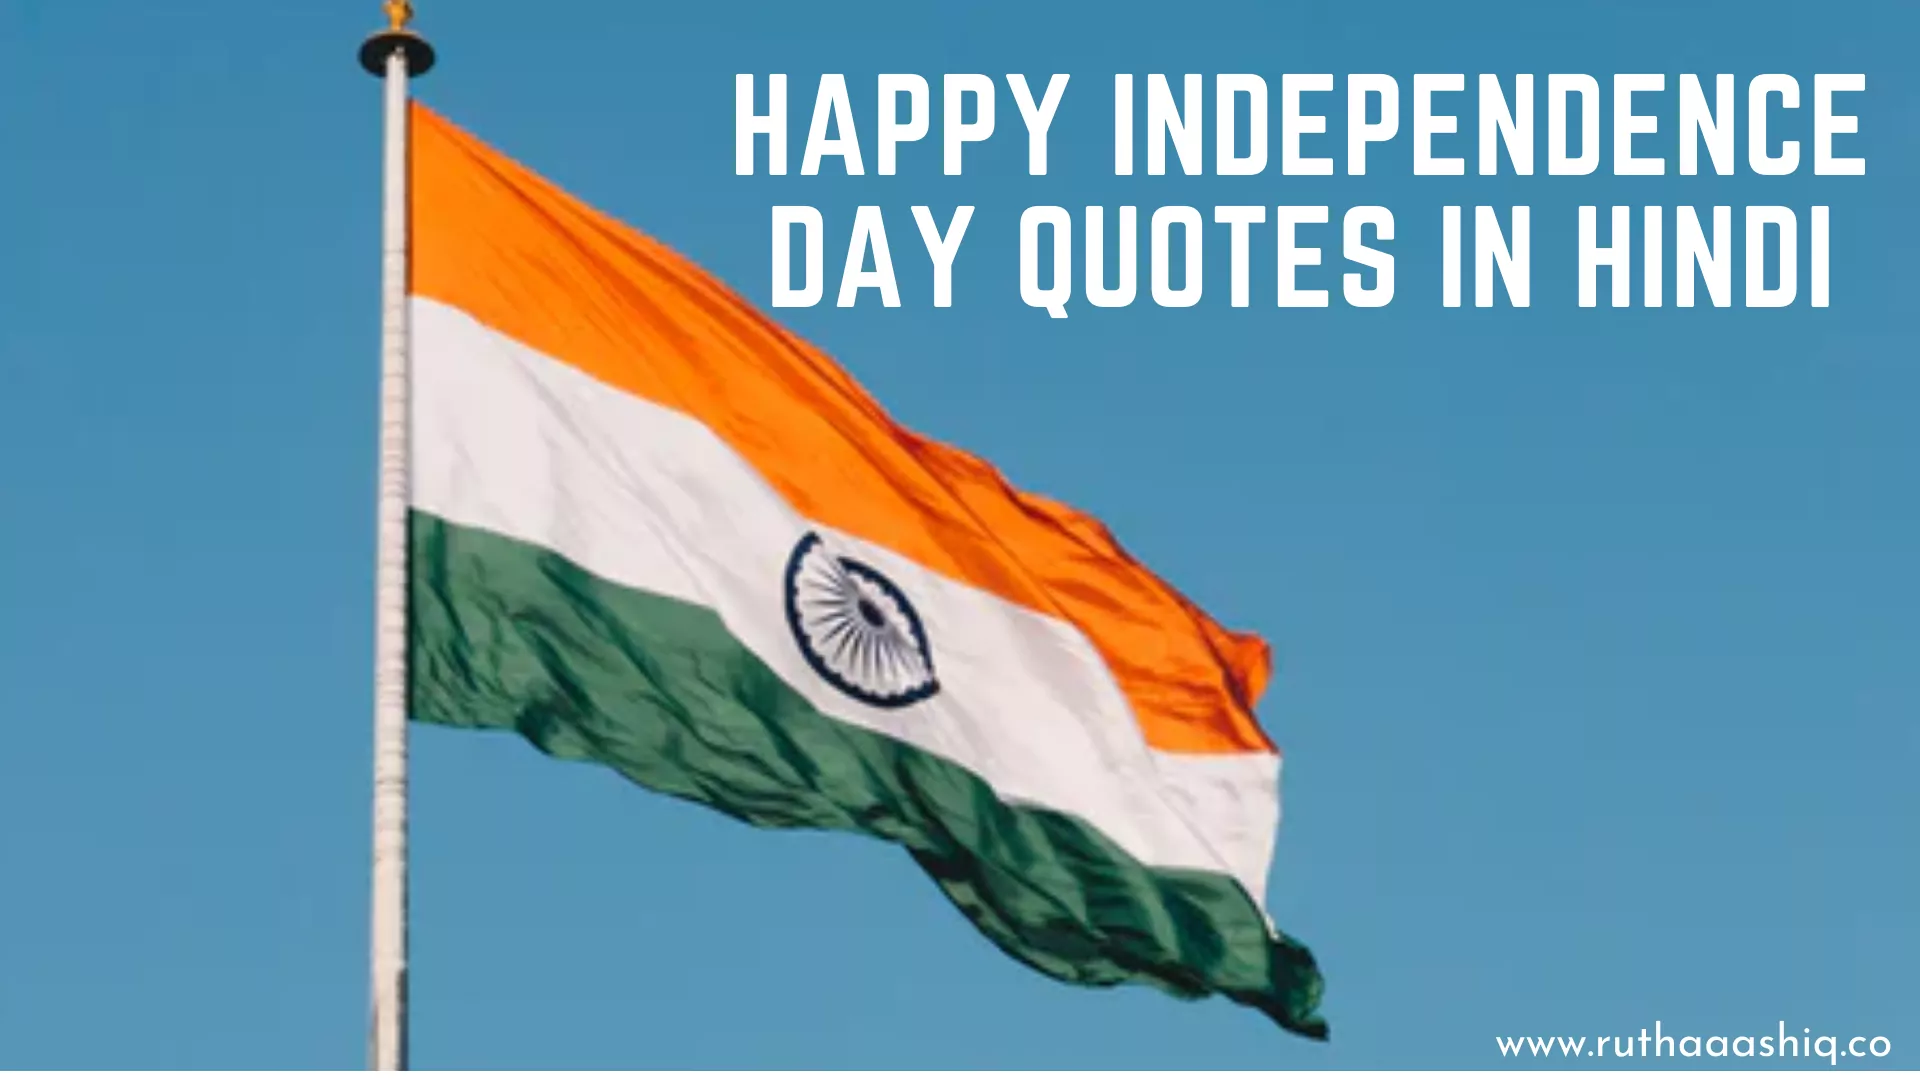 Happy Independence Day Quotes In Hindi